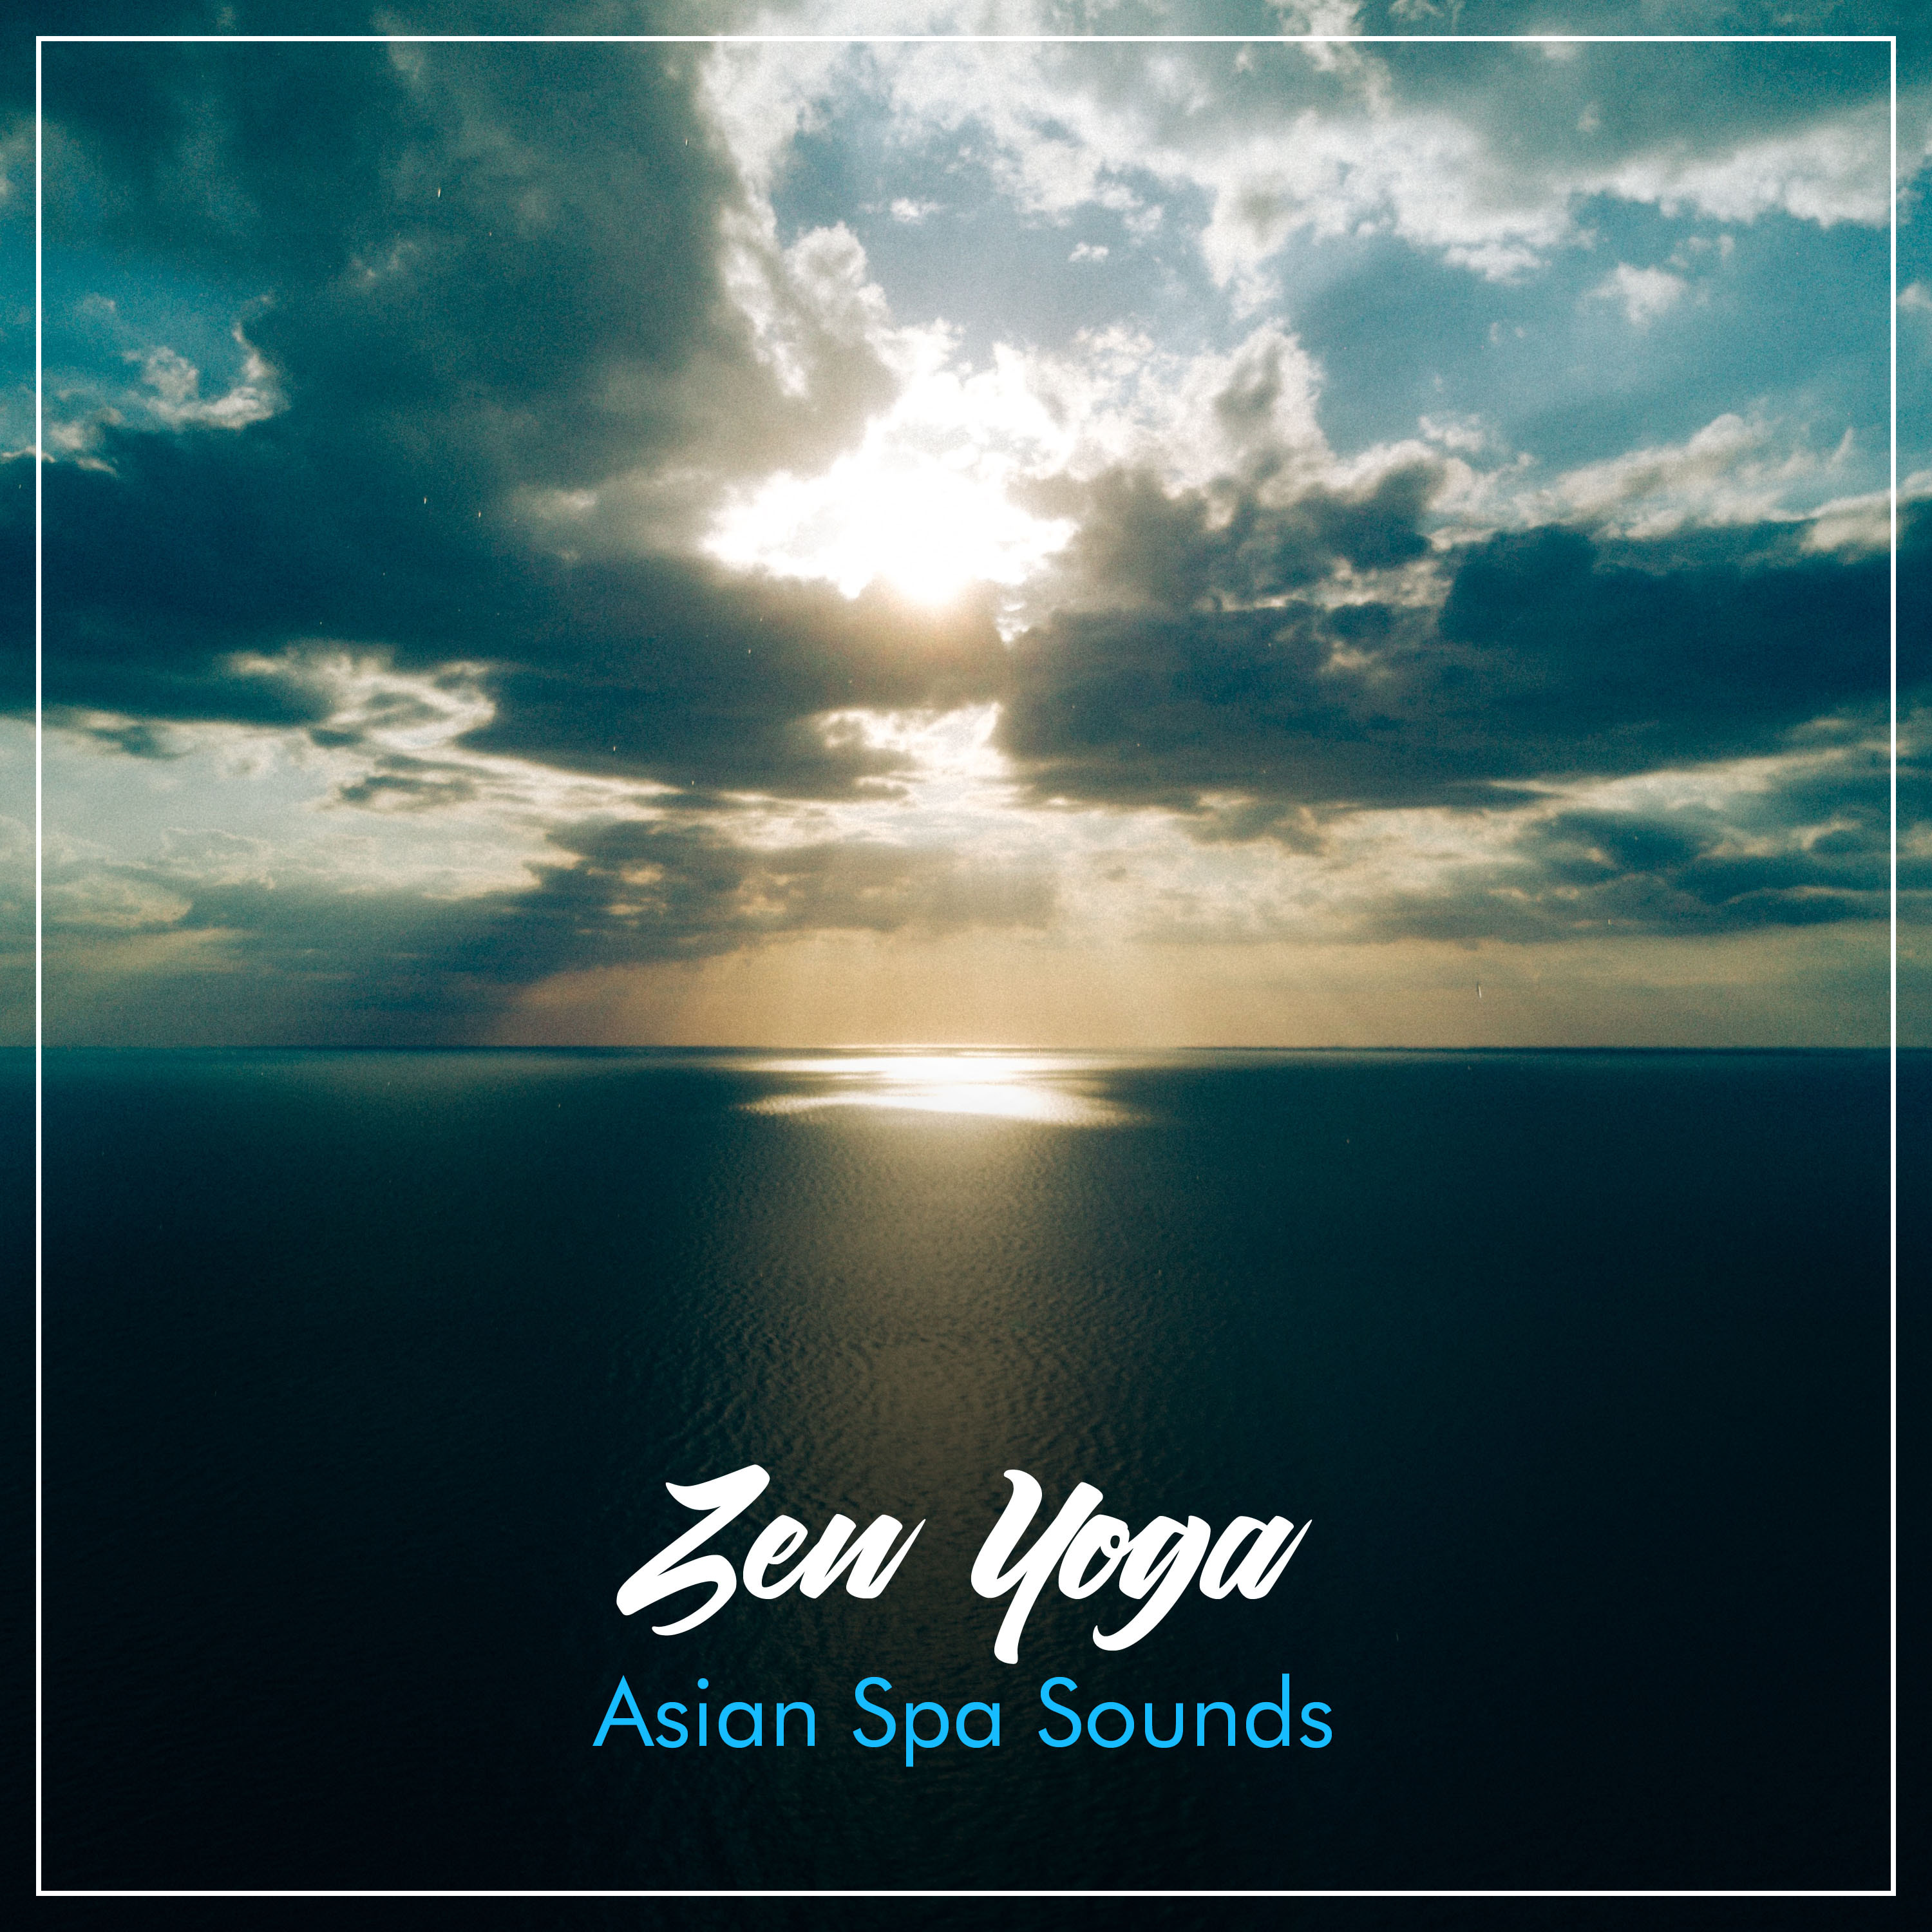 10 Zen Yoga and Asian Spa Relaxation Sounds